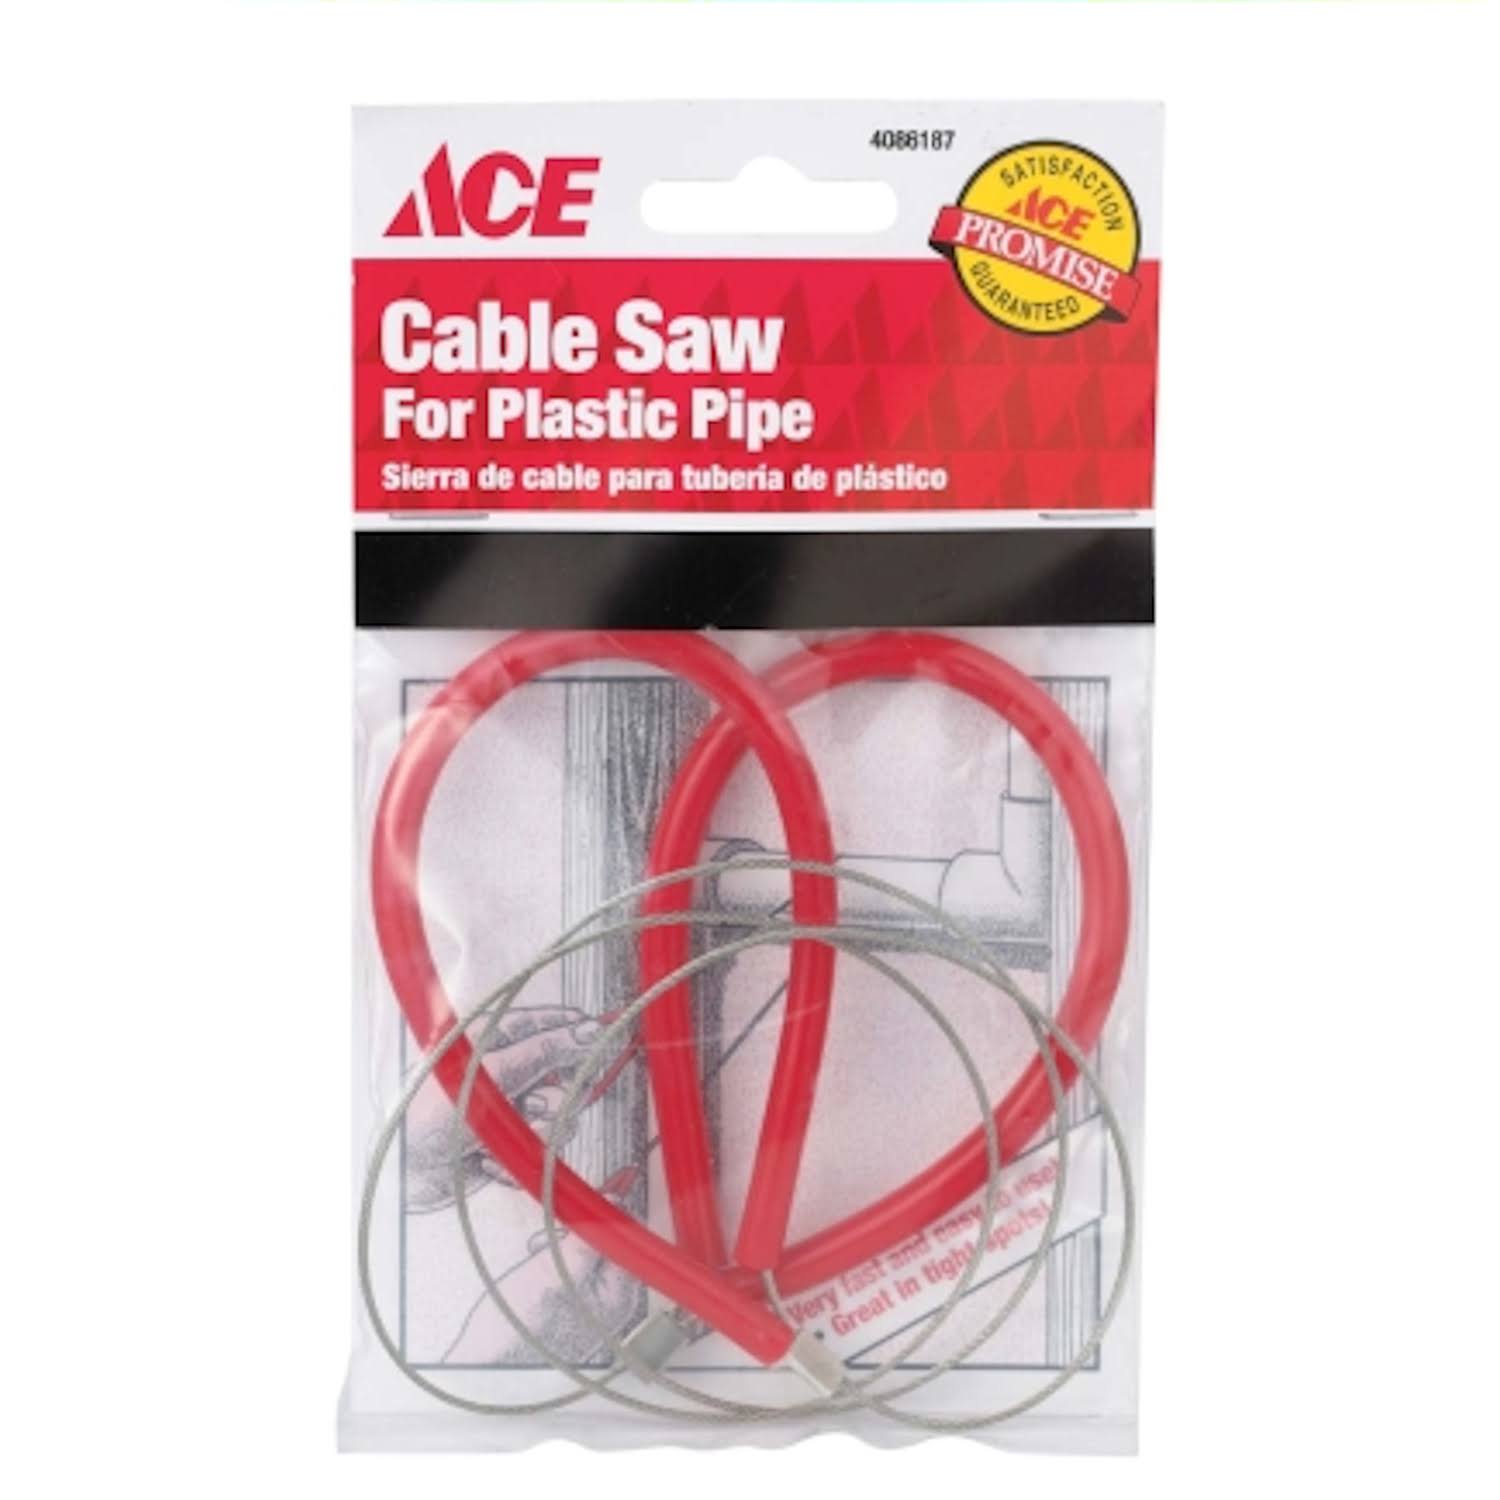 Ace Cable Saw for Plastic Pipe